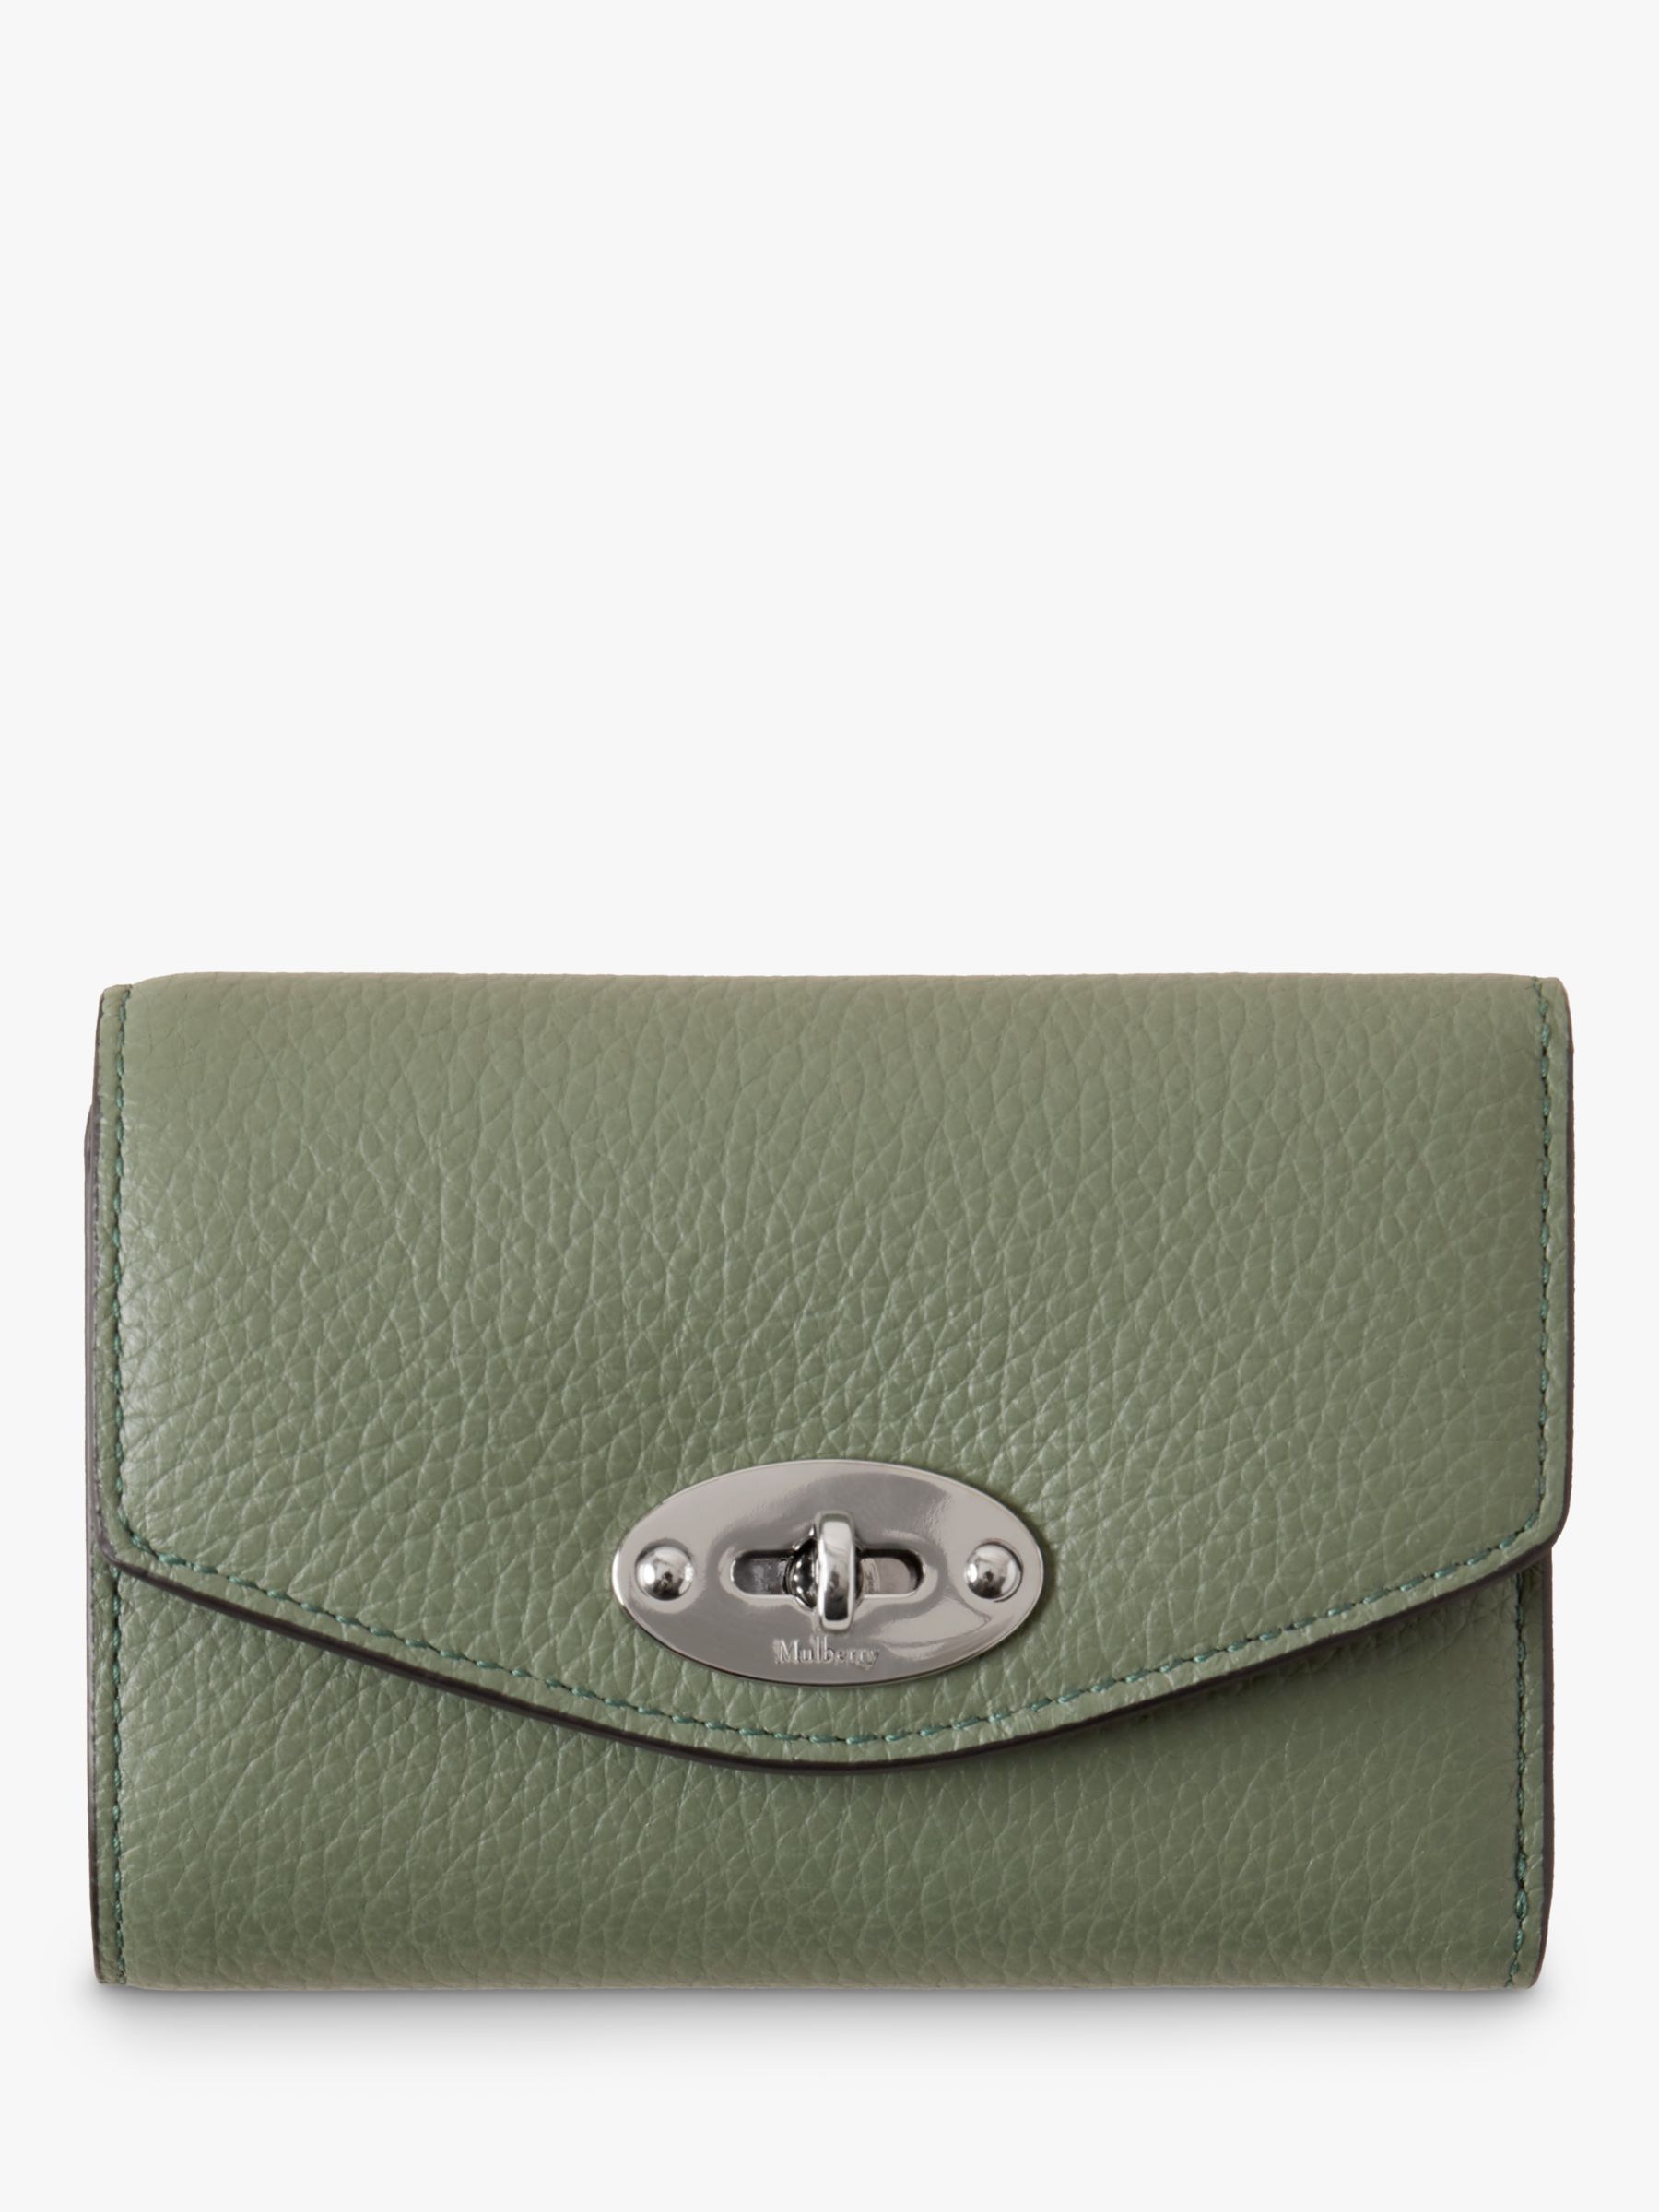 Mulberry Darley Small Classic Grain Leather Folded Multi-Card Wallet ...